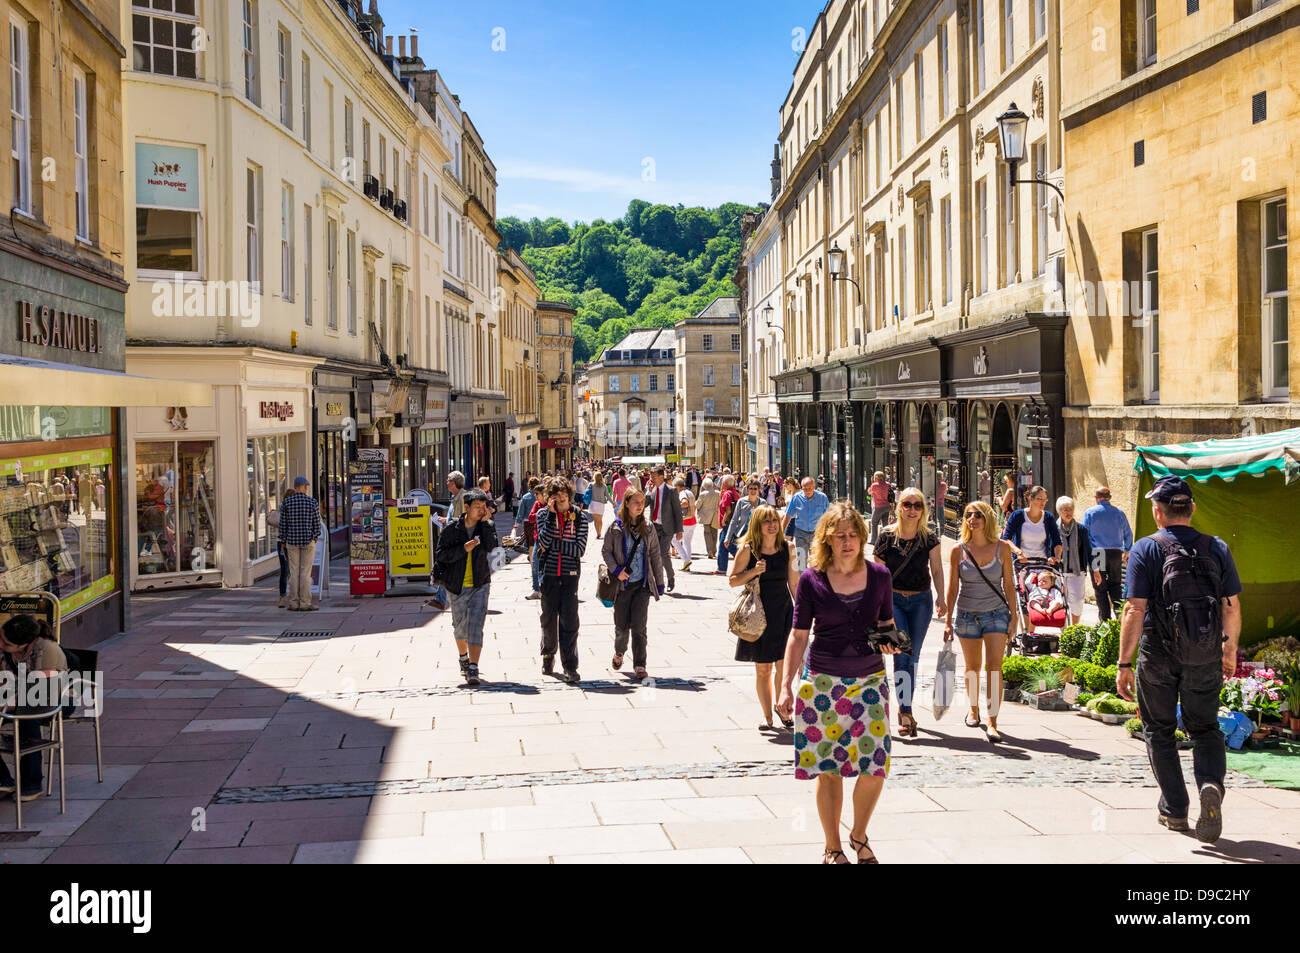 People shopping in the high street in Bath, Somerset, England, UK Stock Photo